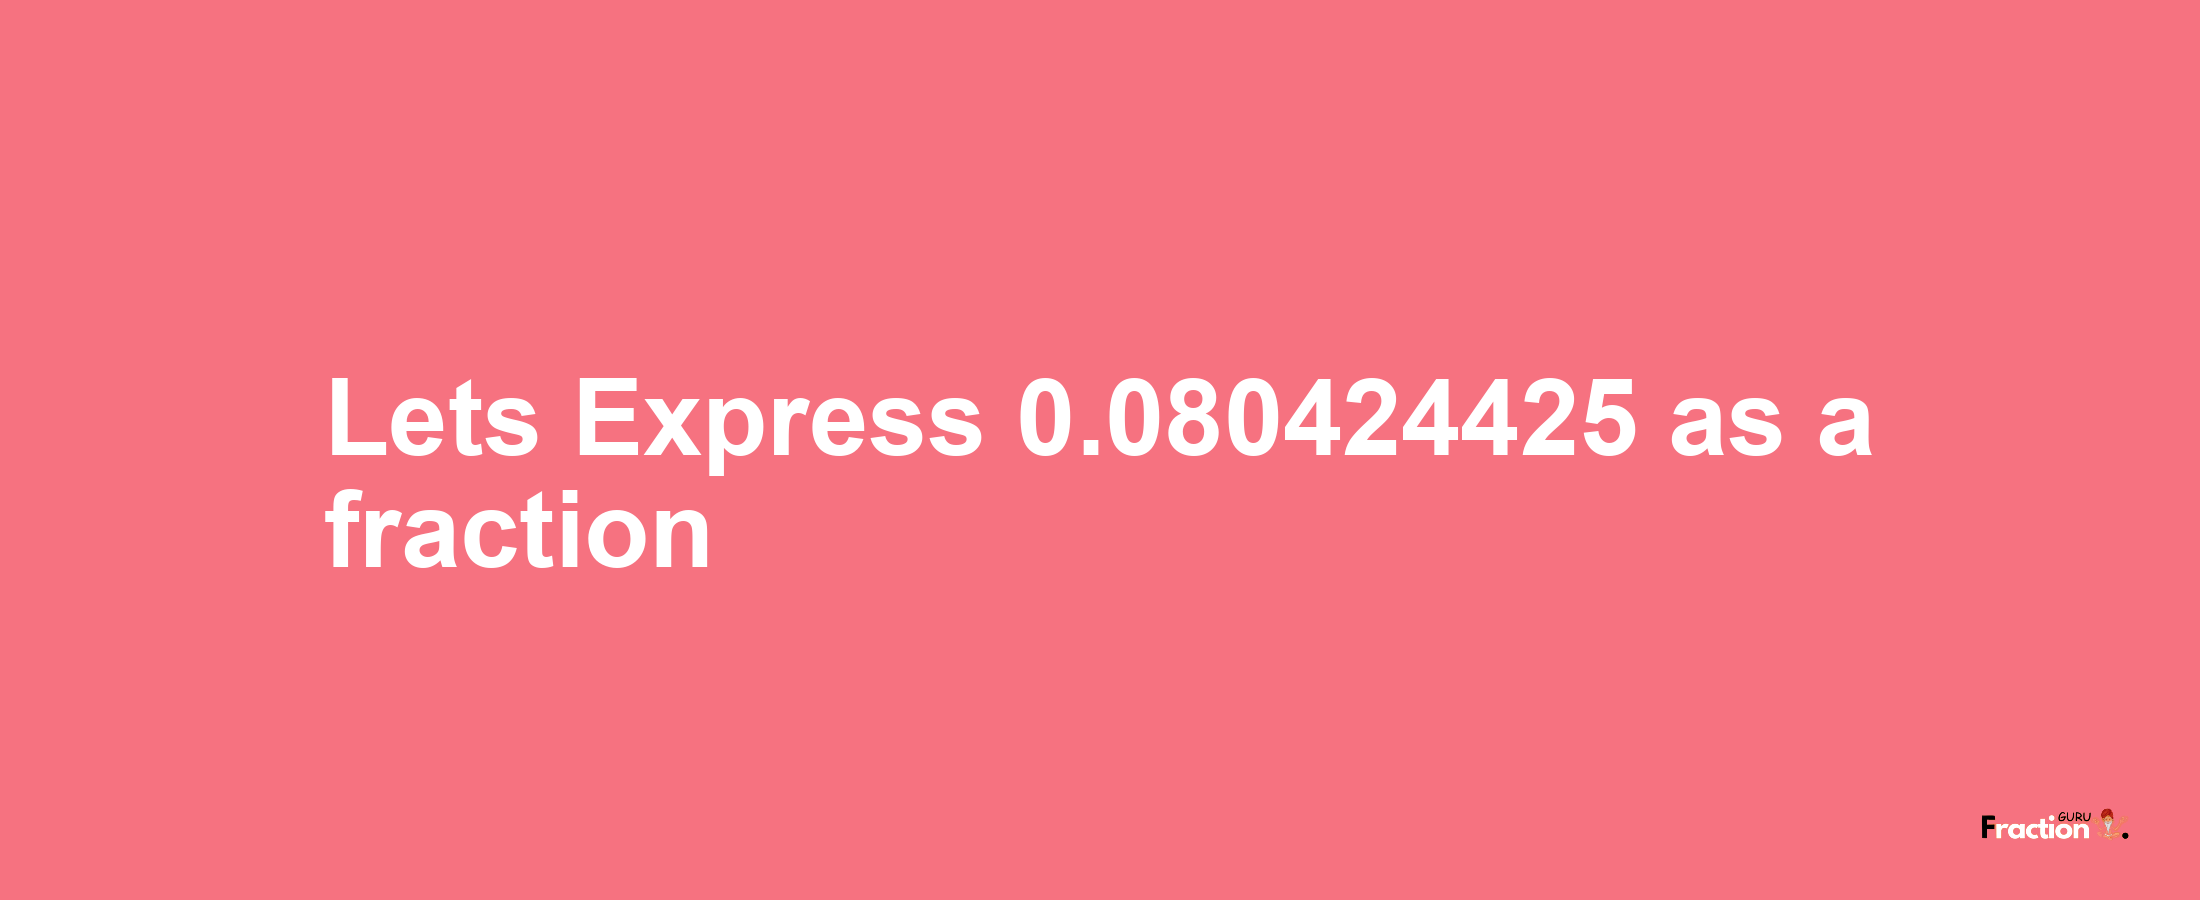 Lets Express 0.080424425 as afraction